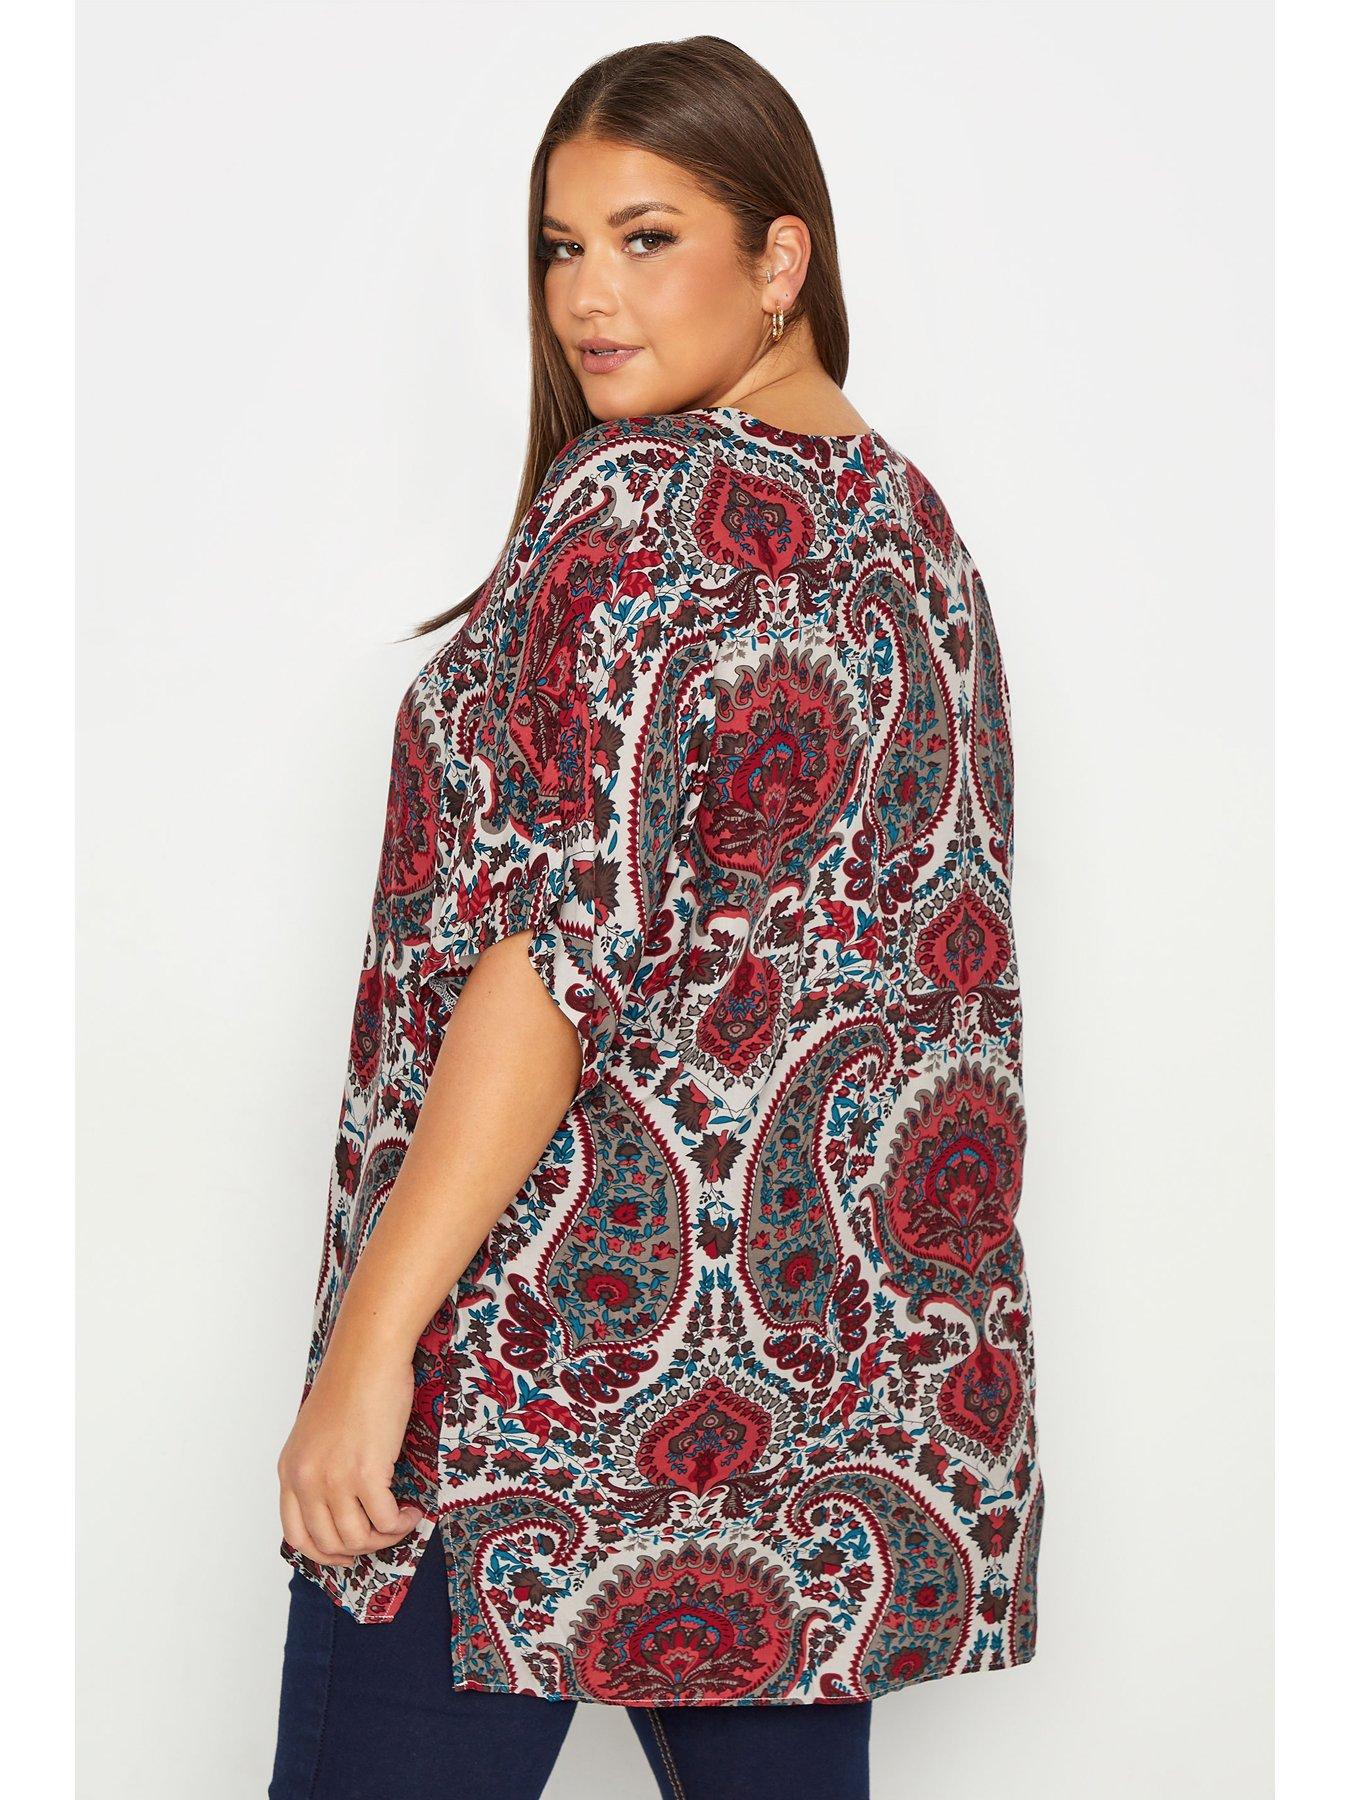 Tops & T-shirts grown on Sleeve top with pleat front - White Red Paisley